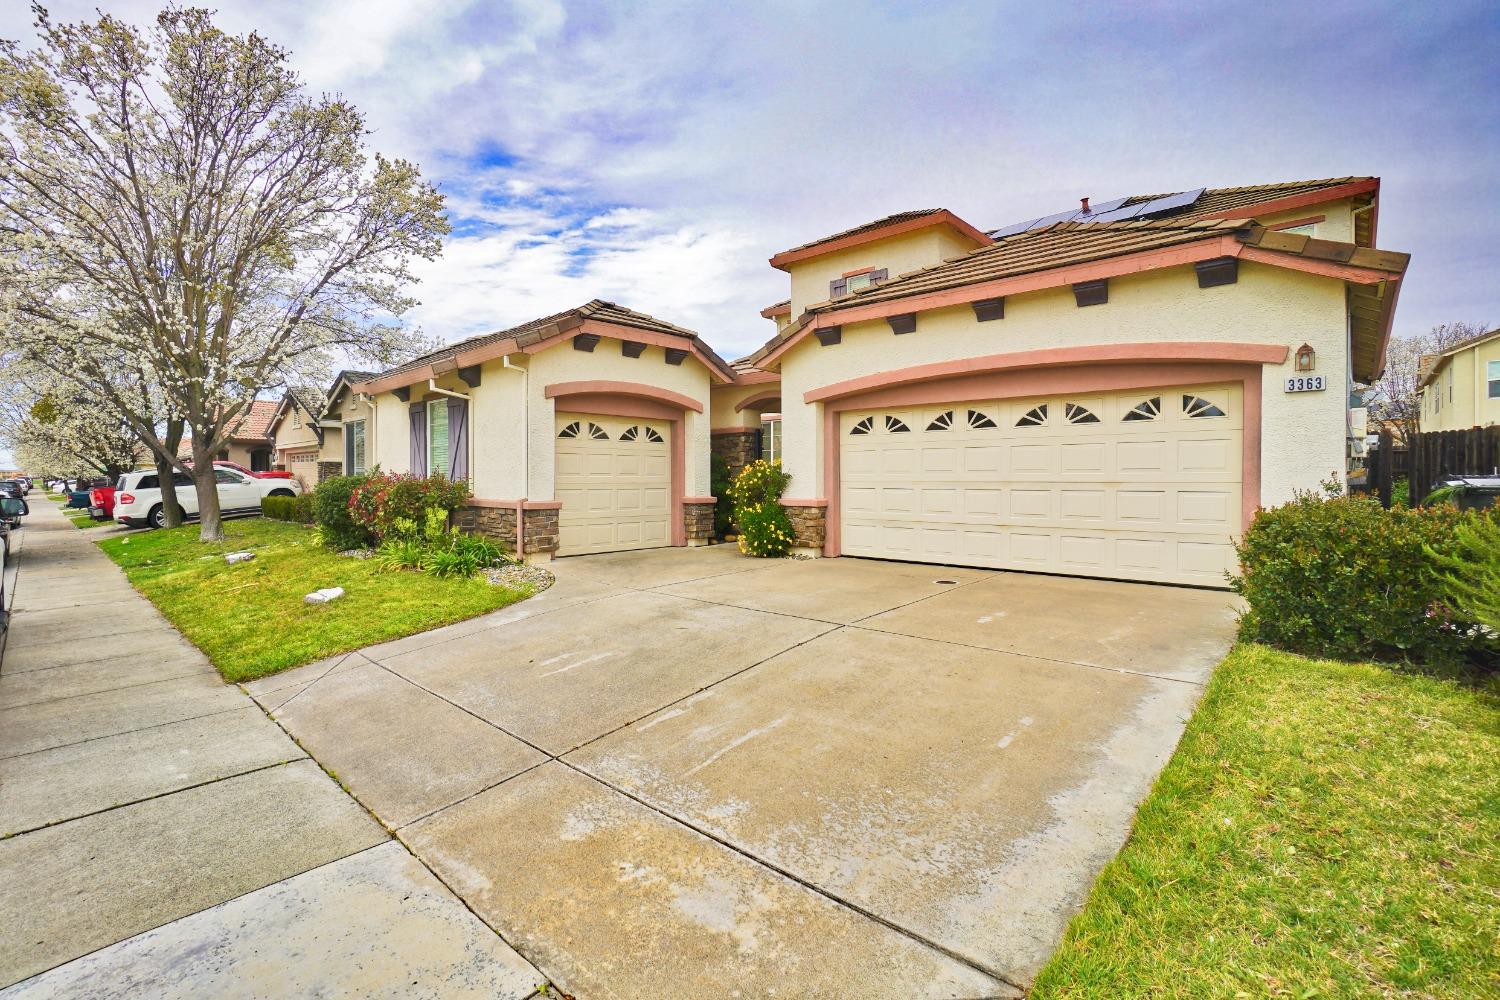 Looking for a large 5 bedroom 3 bath home? This is it! Wonderful and spacious North Natomas home wit